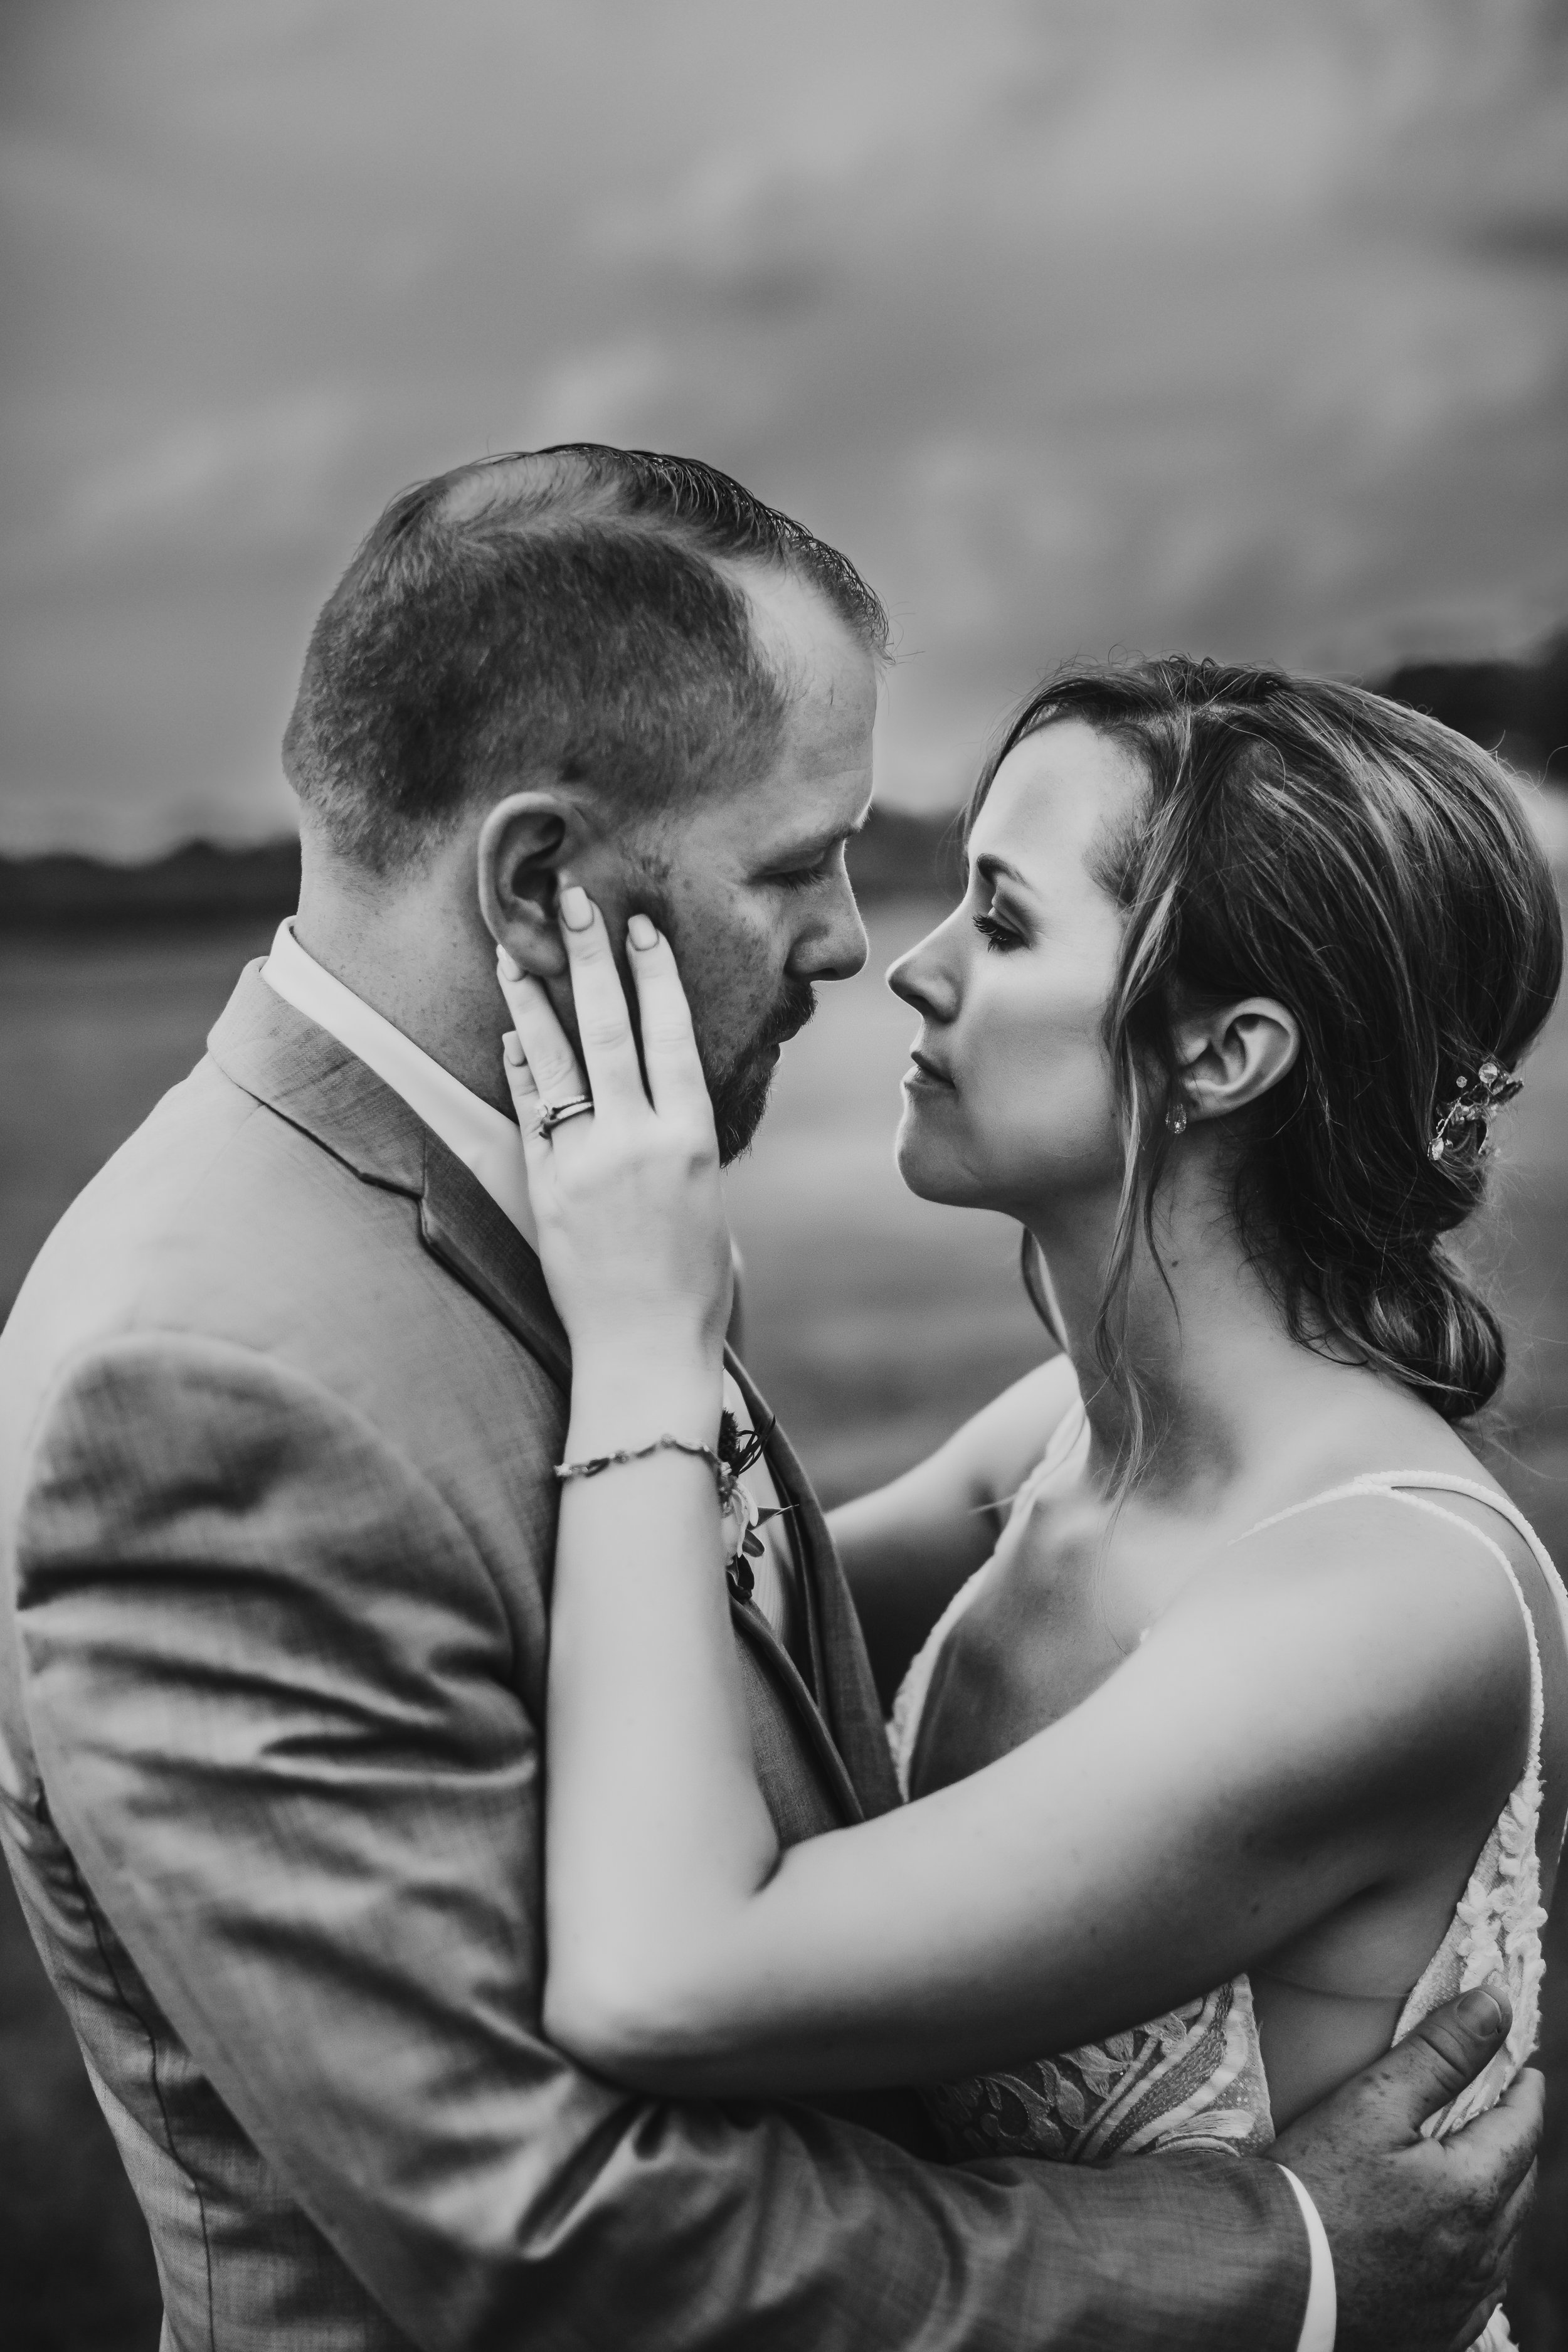  Black and white portrait of the bride and groom kissing in the Illinois Valley by Teala Ward Photography. tender wedding moments #TealaWardPhotography #IllinoisValleyPhotographer #summerwedding #TealaWardWeddings #Illinoisweddings  